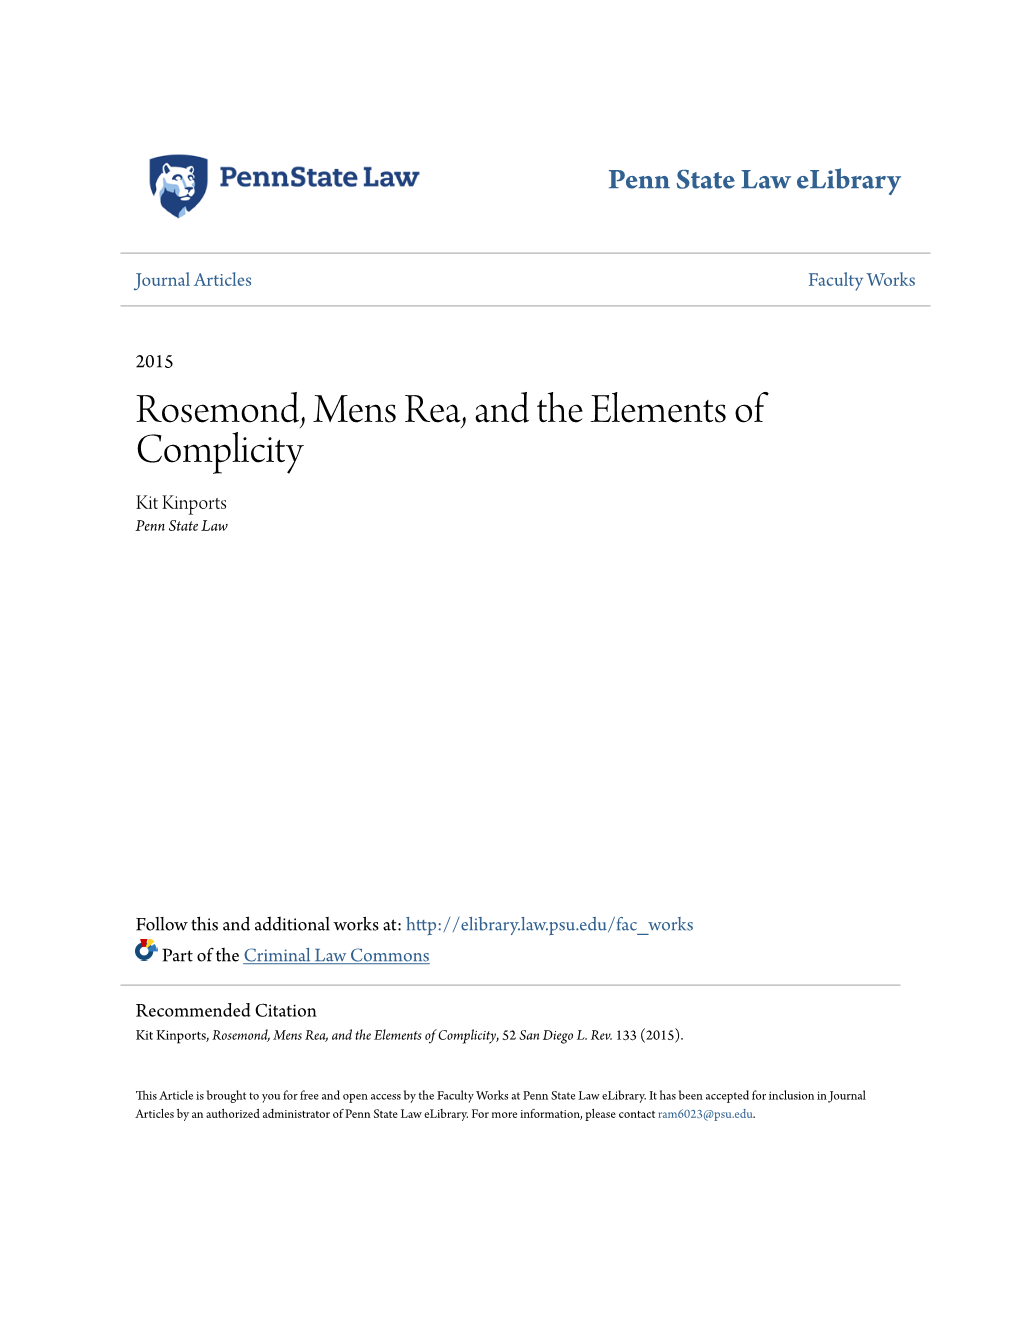 Rosemond, Mens Rea, and the Elements of Complicity Kit Kinports Penn State Law